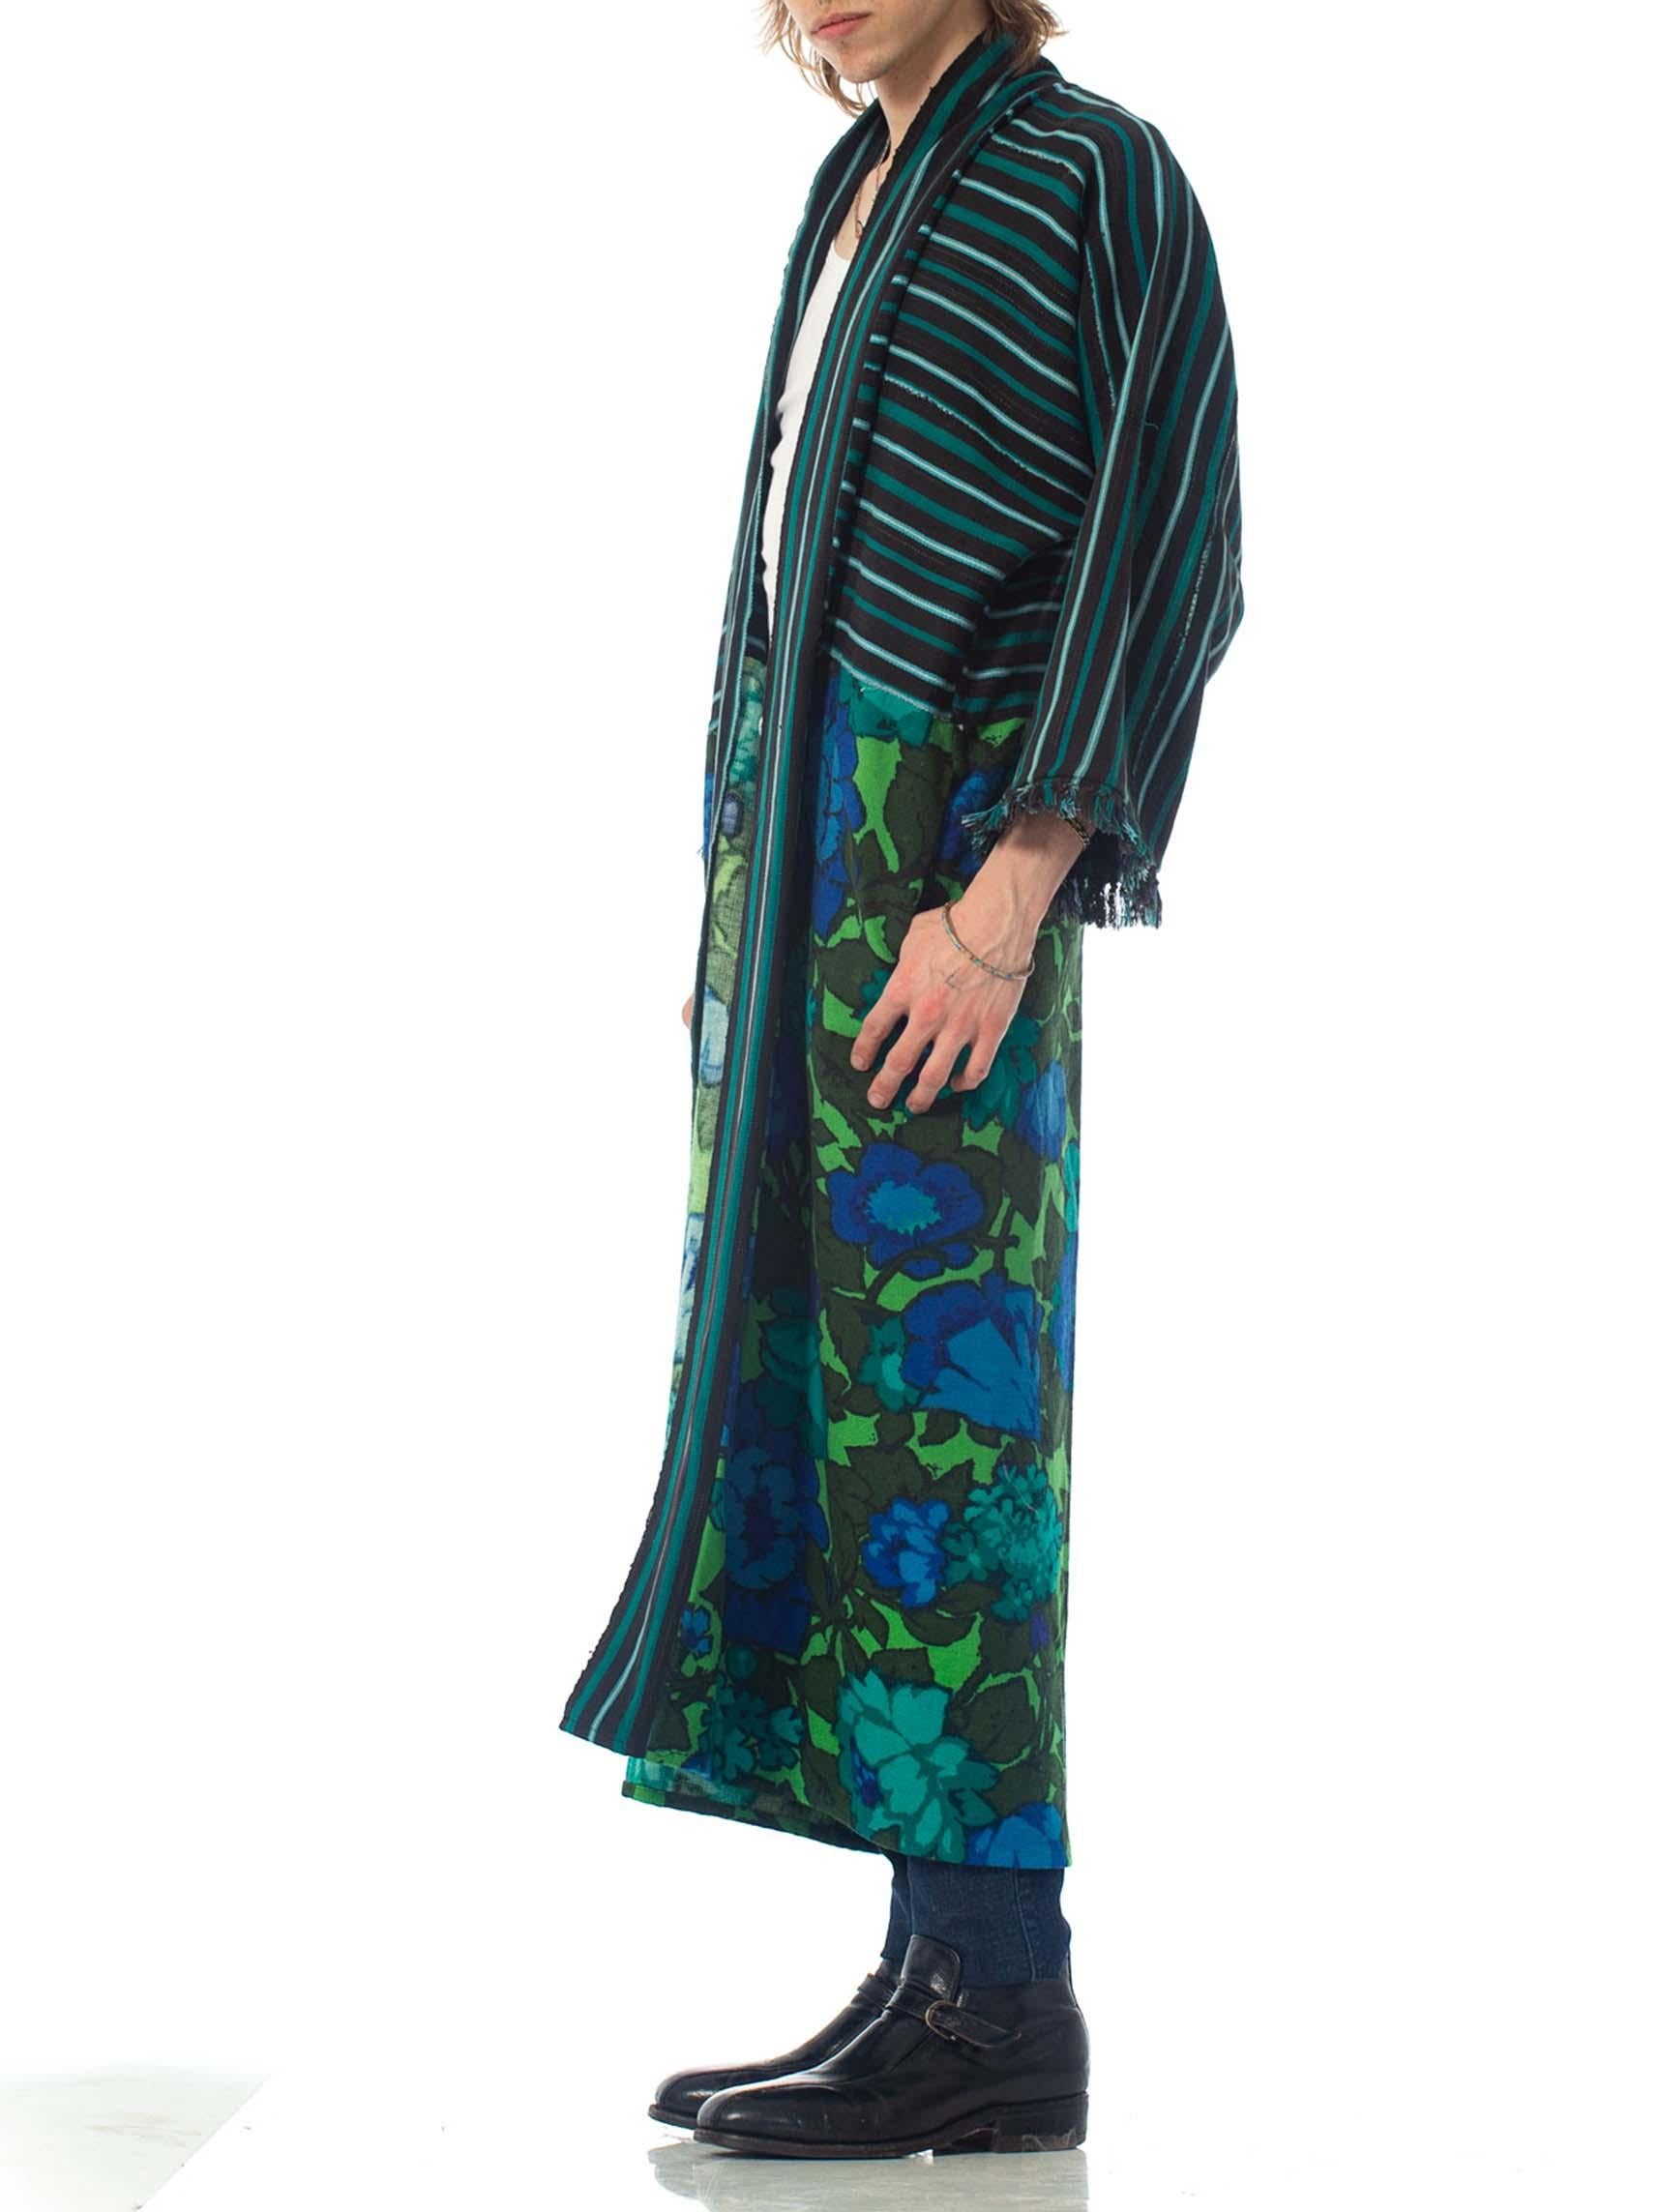 MORPHEW COLLECTION Black & Green Cotton Duster Coat Made From African Indigo 19 3